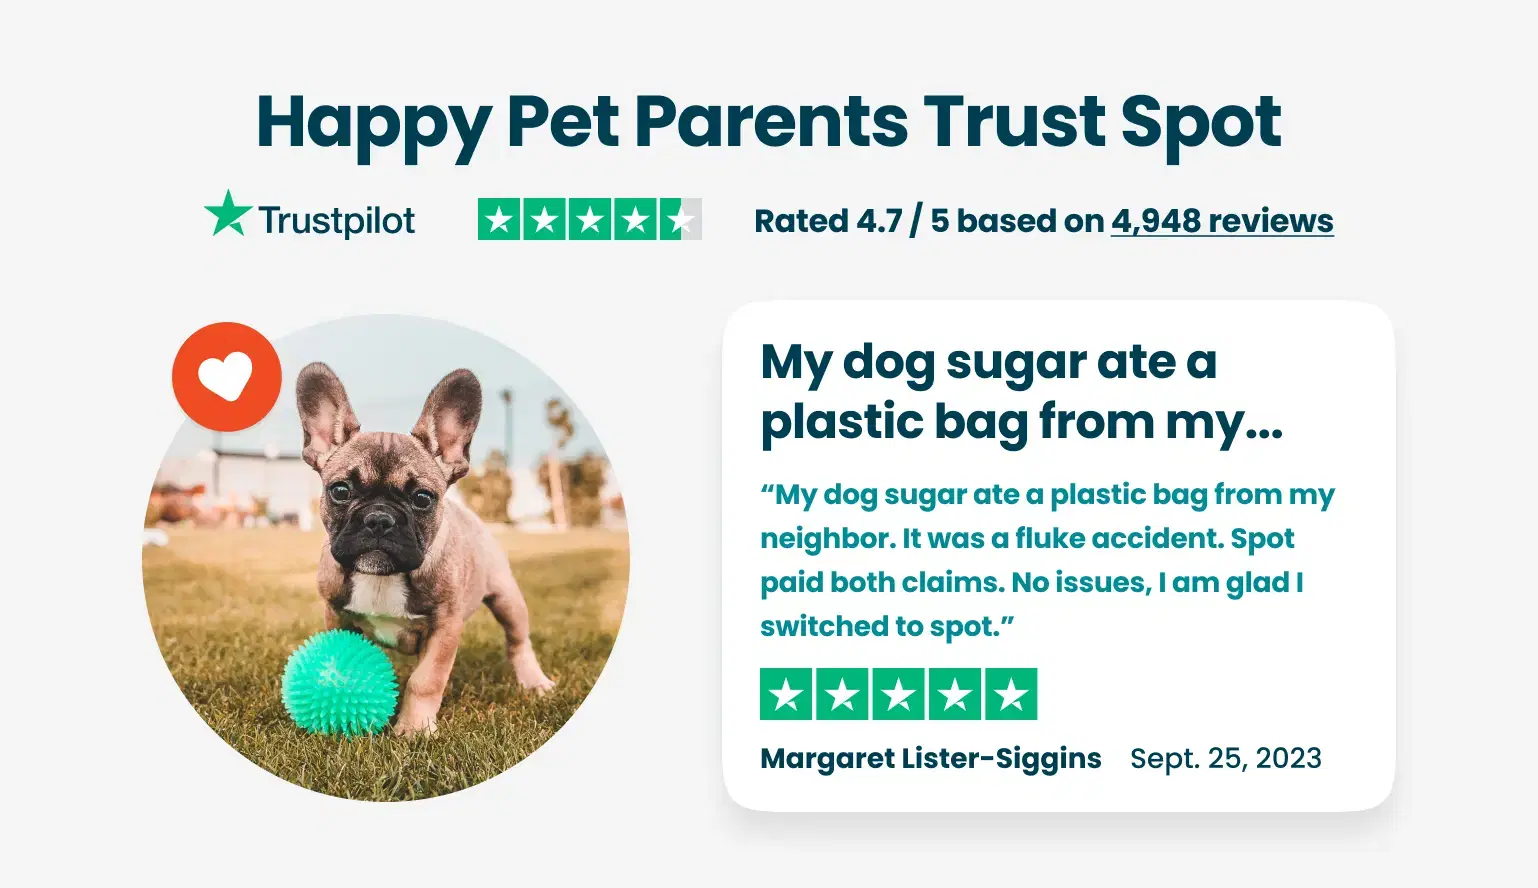 A dog plays with a green ball on grass next to a Trustpilot review.